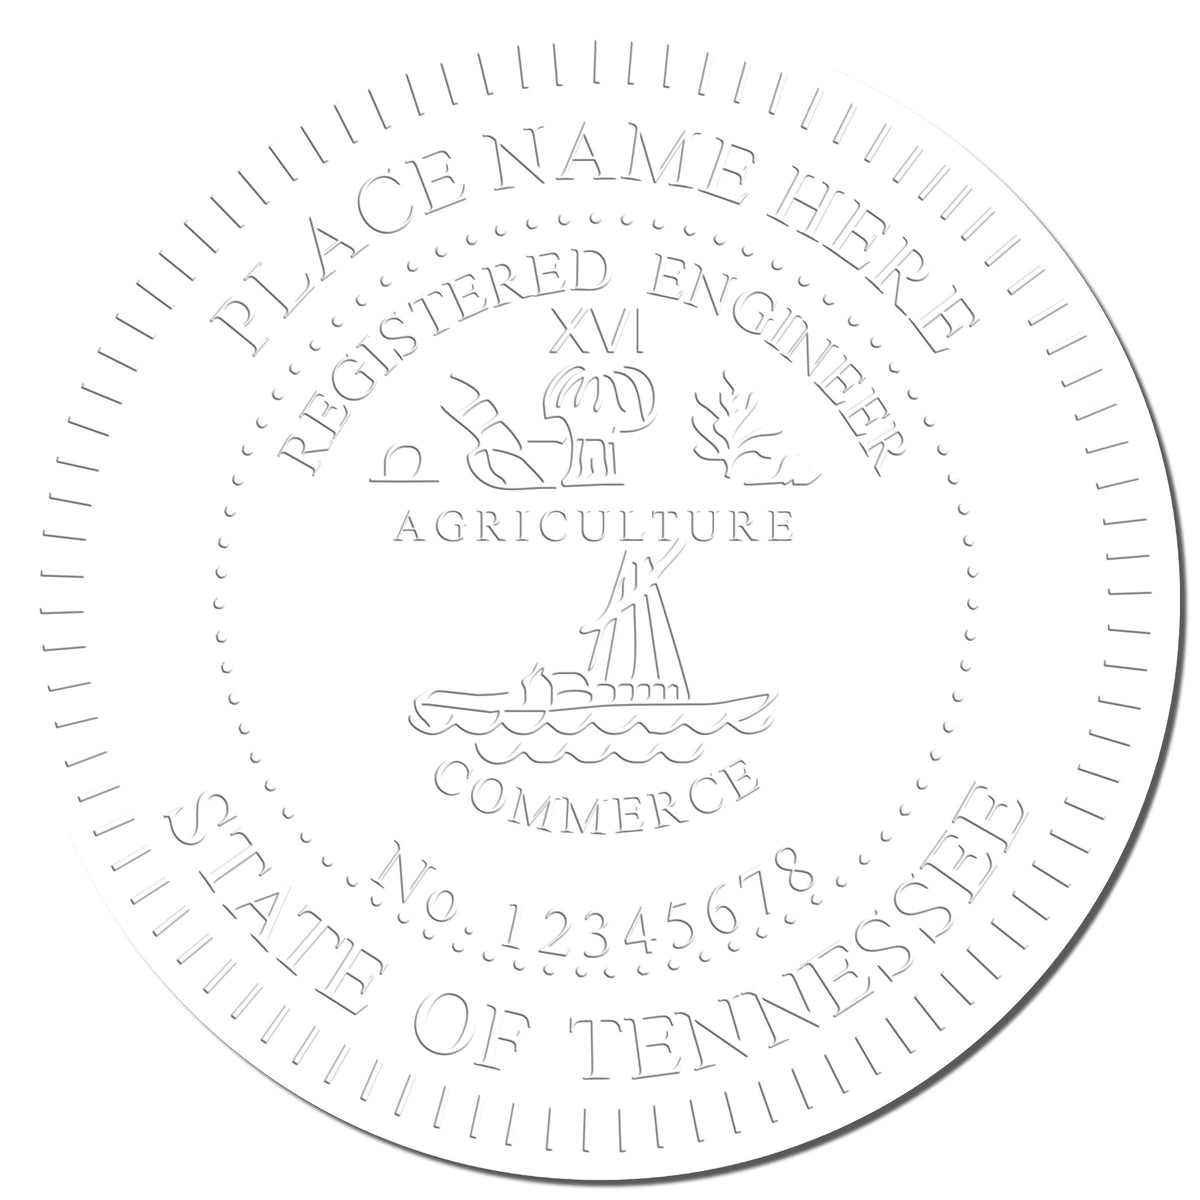 This paper is stamped with a sample imprint of the State of Tennessee Extended Long Reach Engineer Seal, signifying its quality and reliability.